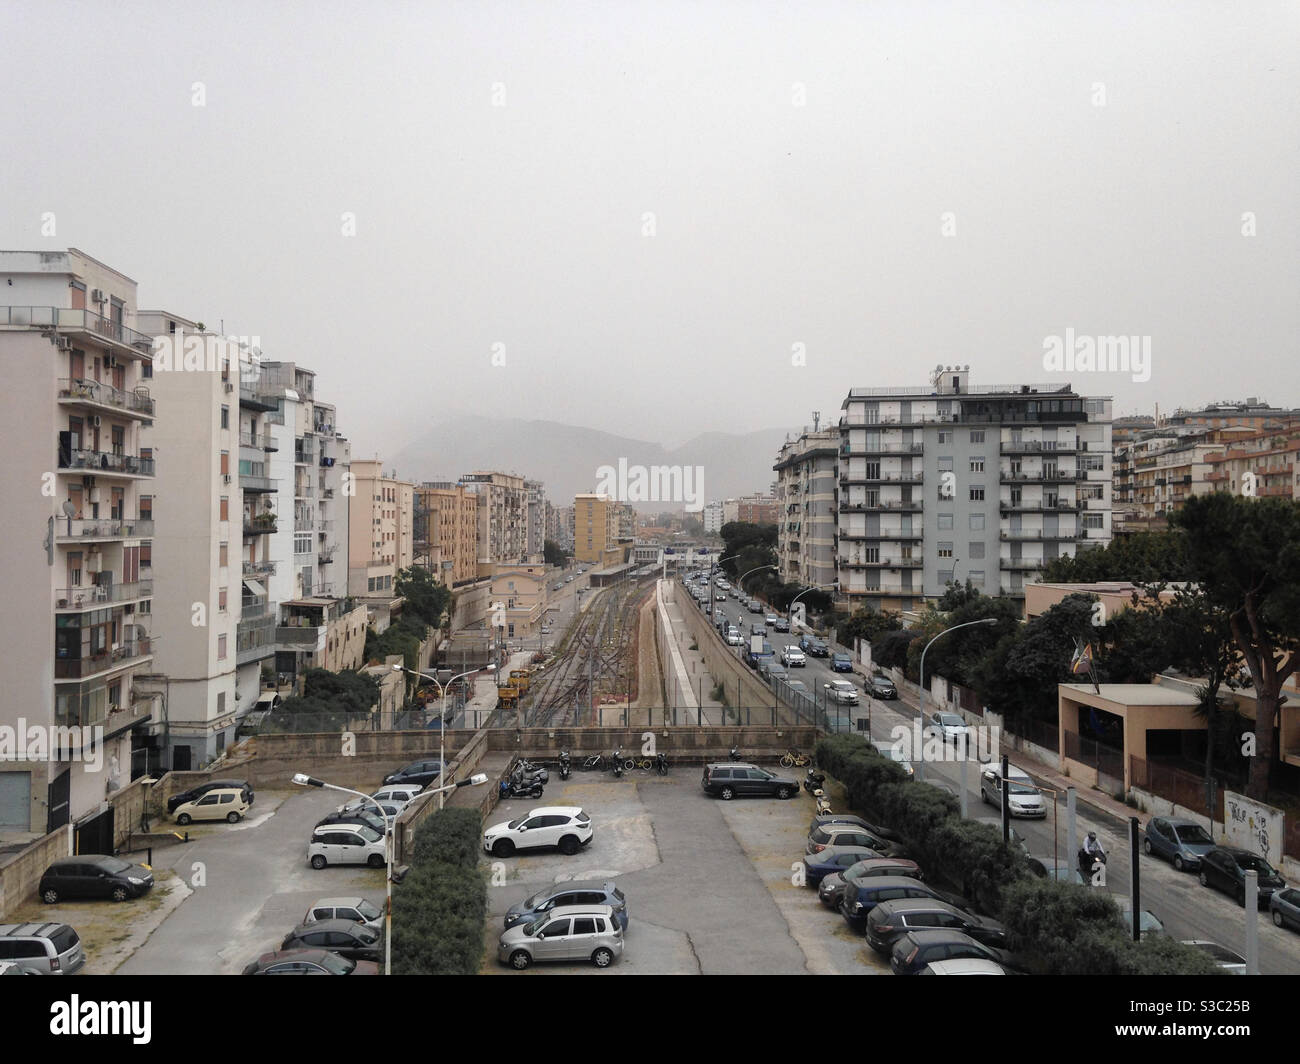 The city of Palermo during a day of scirocco wind. Stock Photo